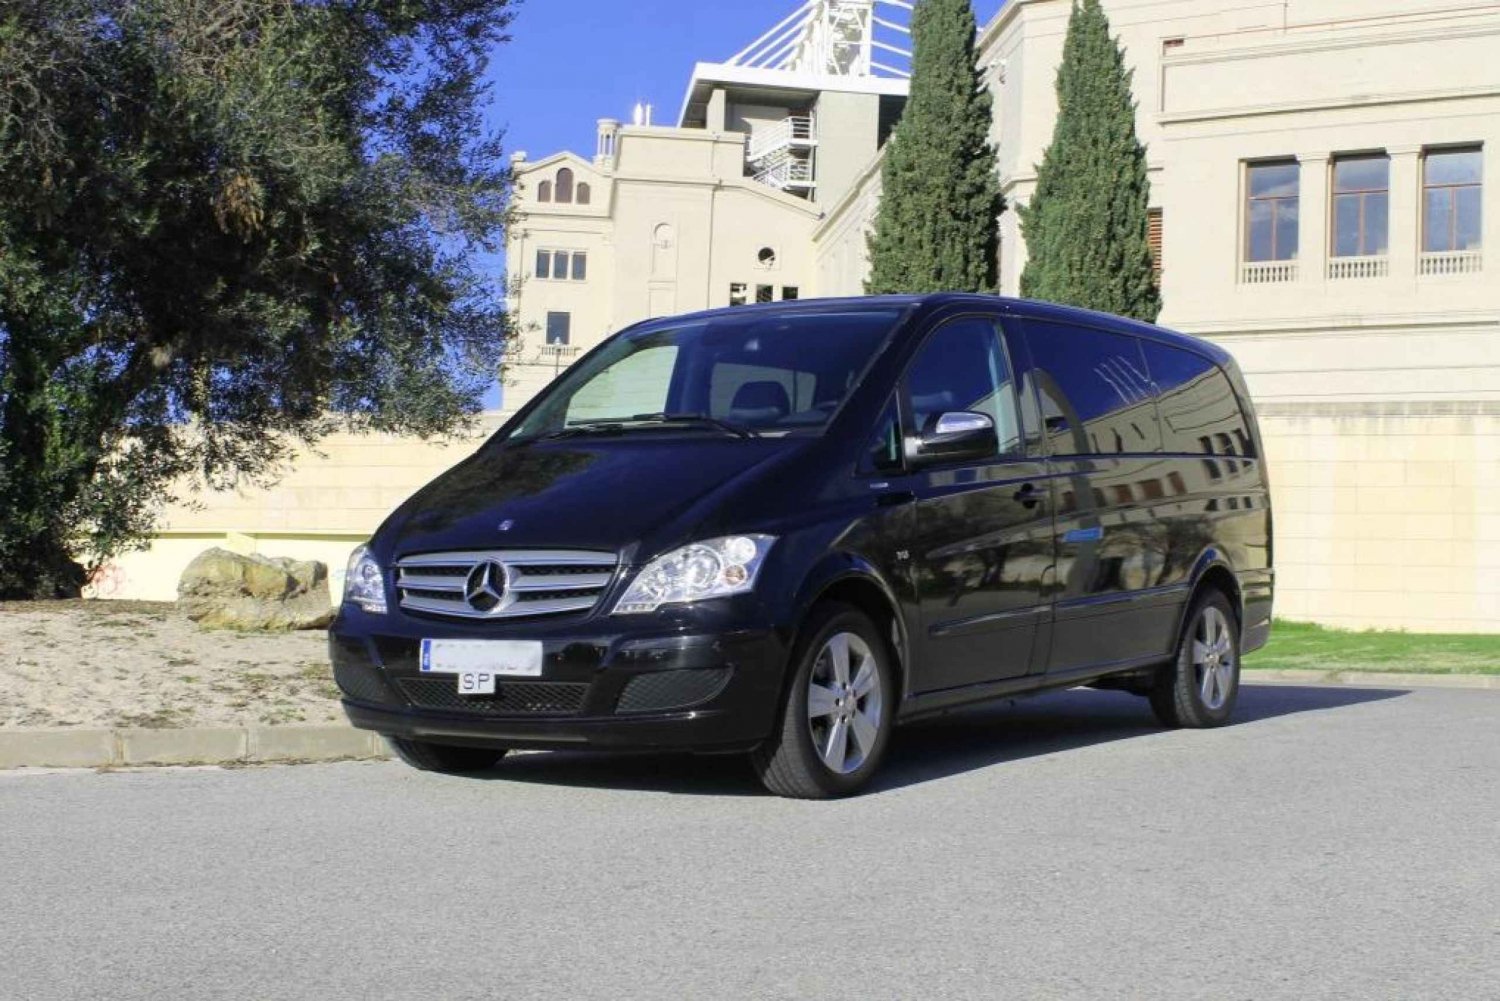 Barcelona Private Transfer Between Sants Station & City